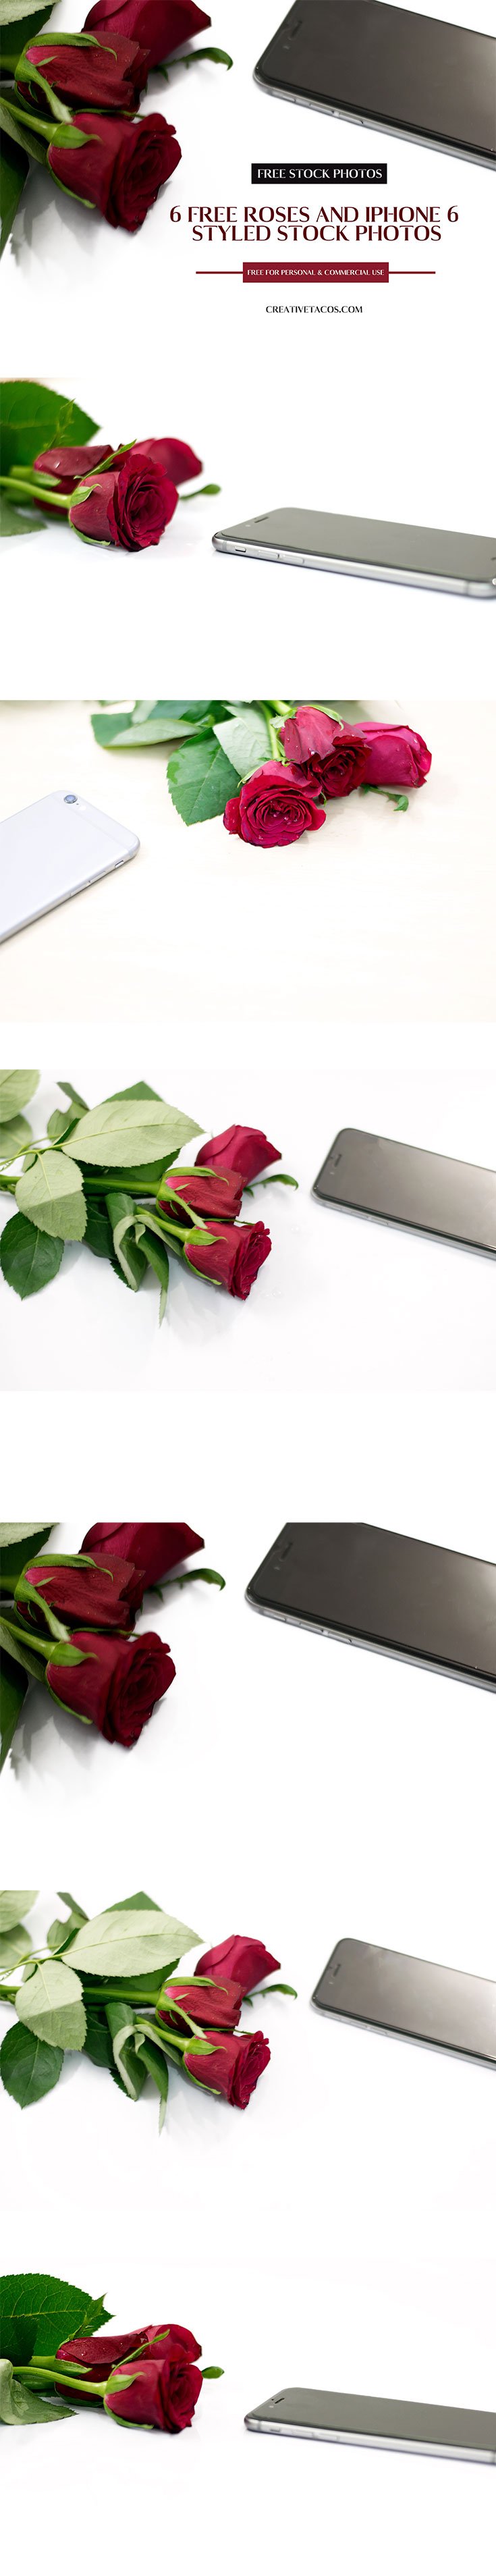 6 Free Roses and iPhone 6 Styled Stock Photos